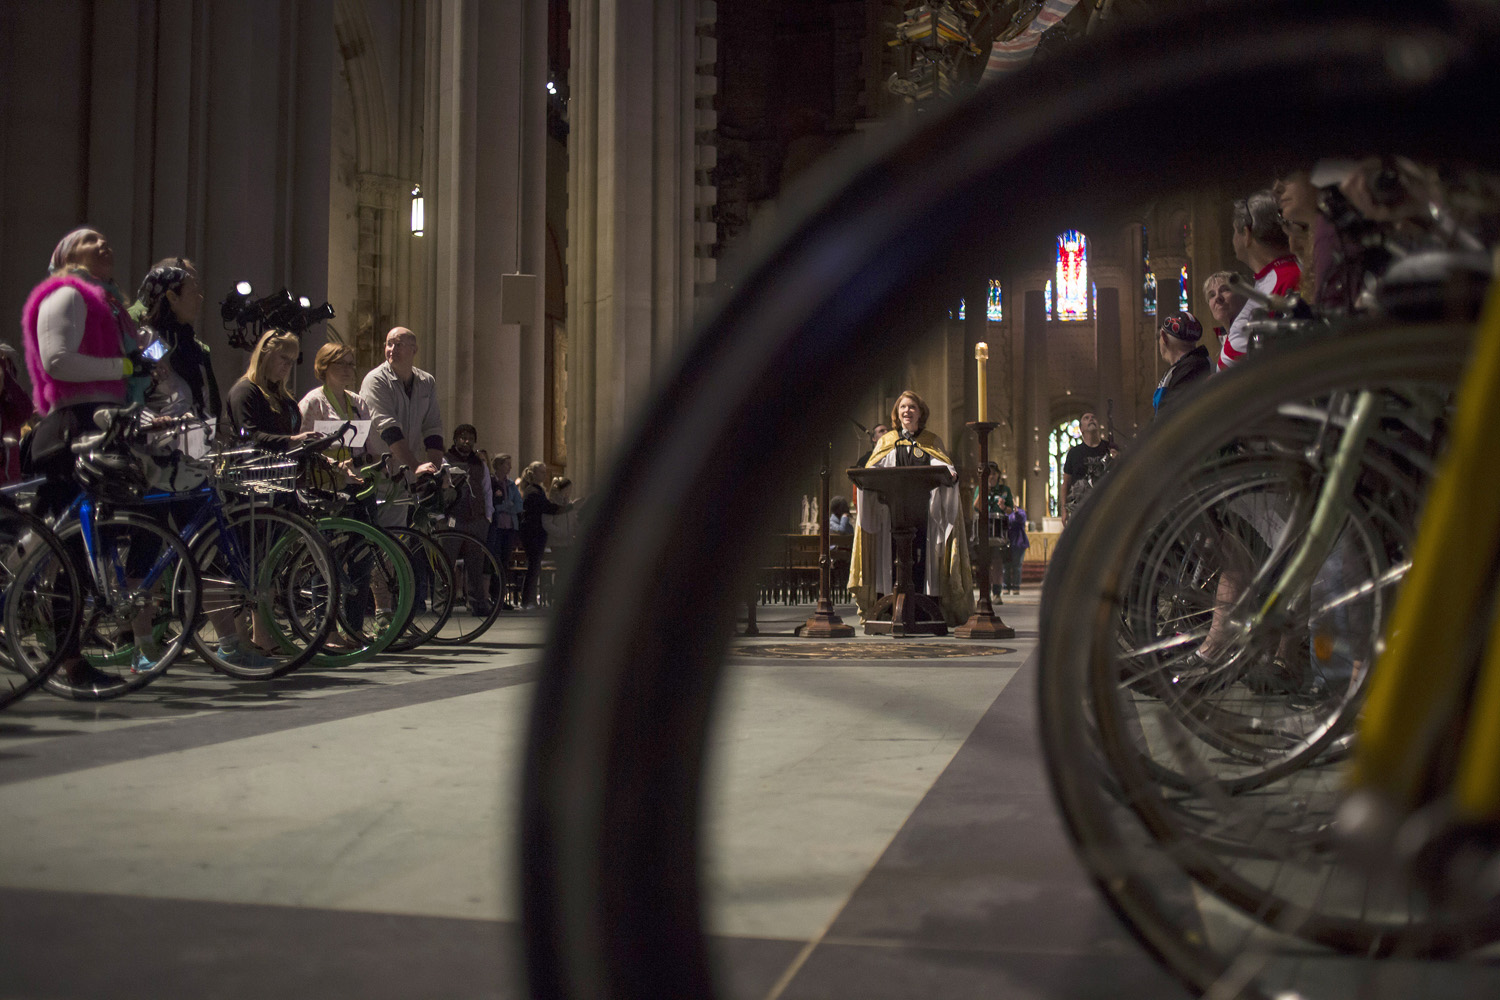 Reverend Julia Whitworth leads the 16th Annual Blessing of the Bikes at Cathedral Church of St. John the Divine on in New York City on May 3, 2014.